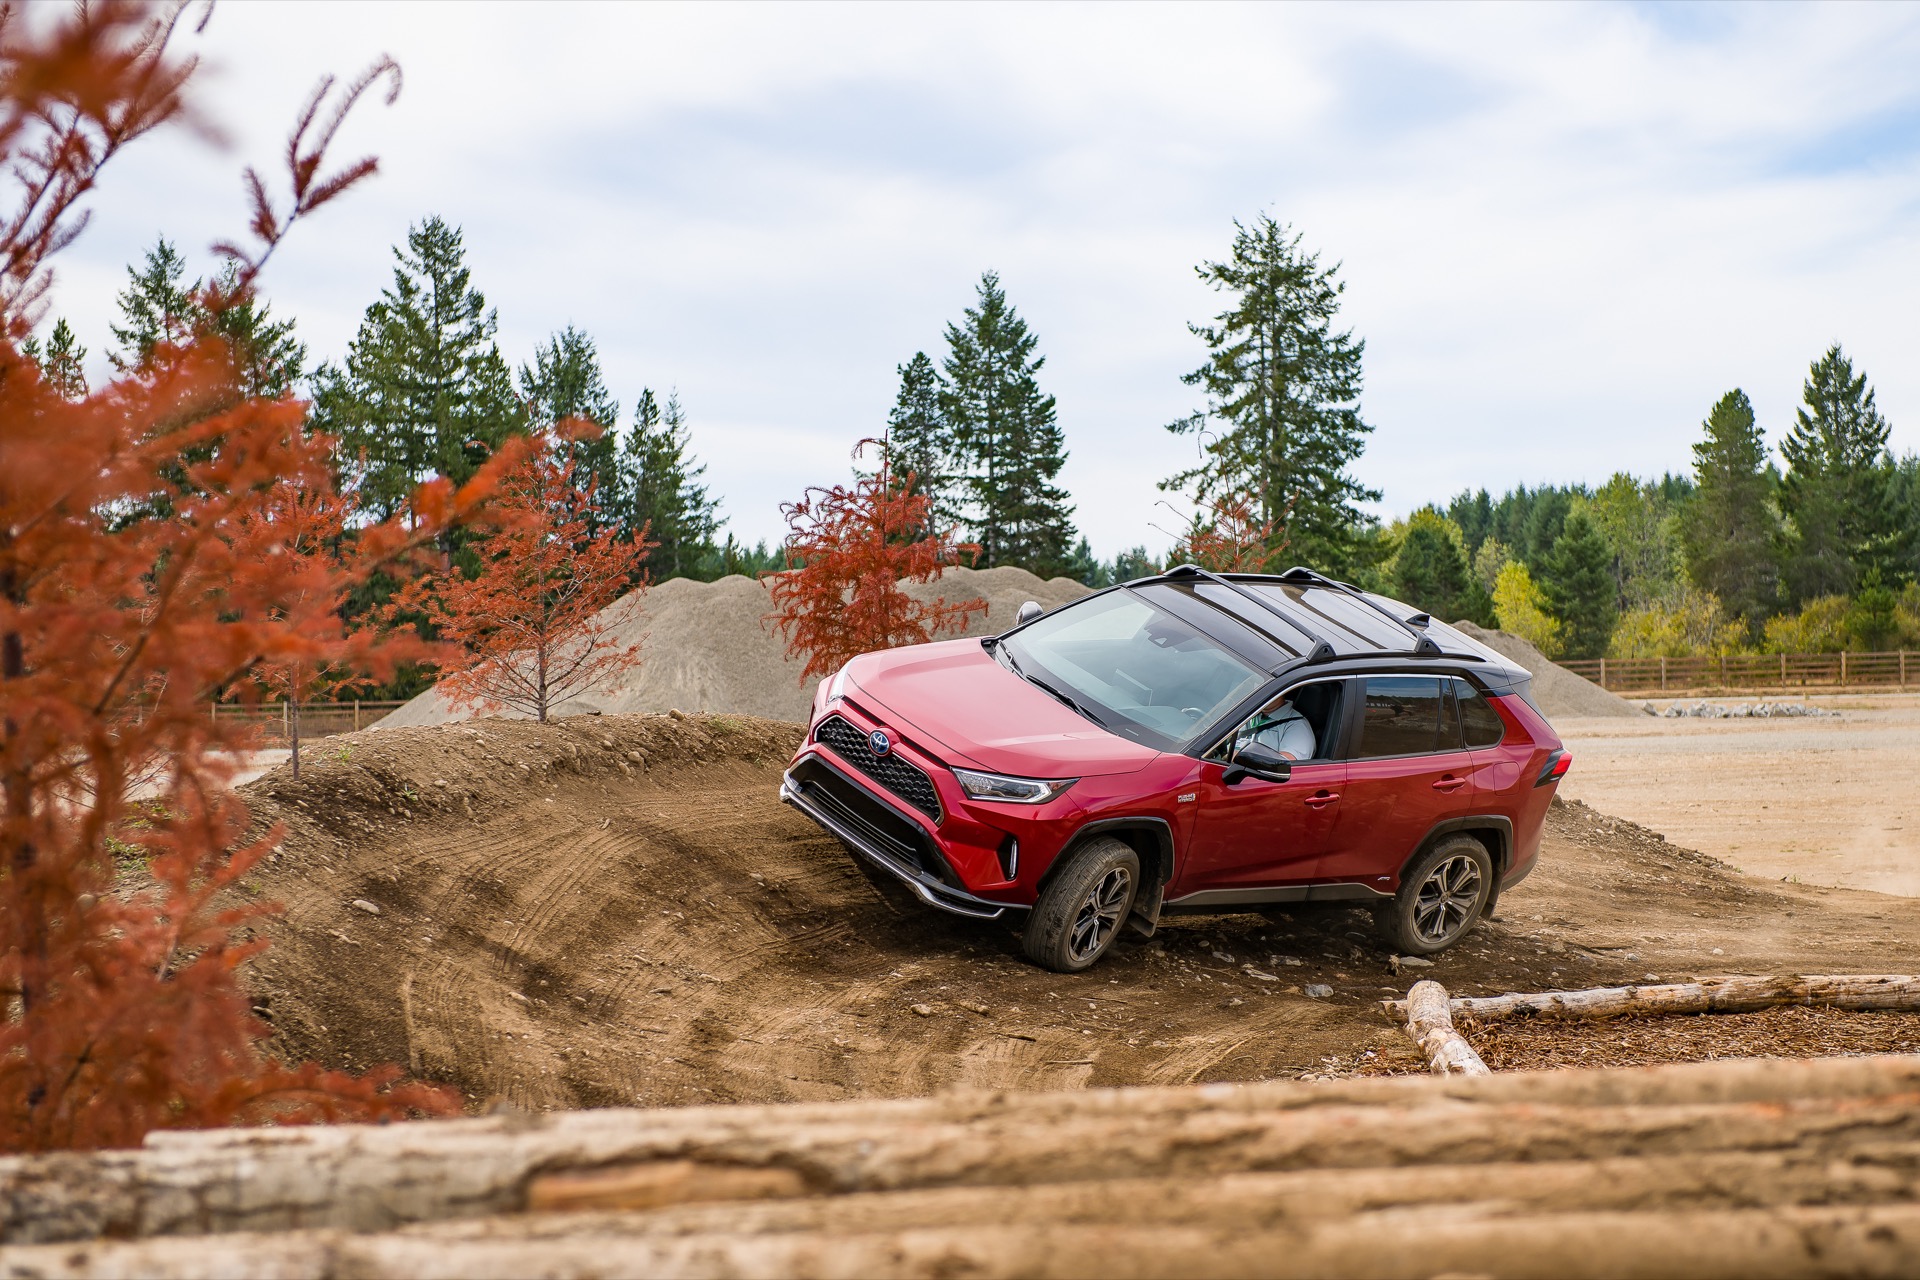 Tested: 2021 Toyota RAV4 Prime is better off-road with EV Mode